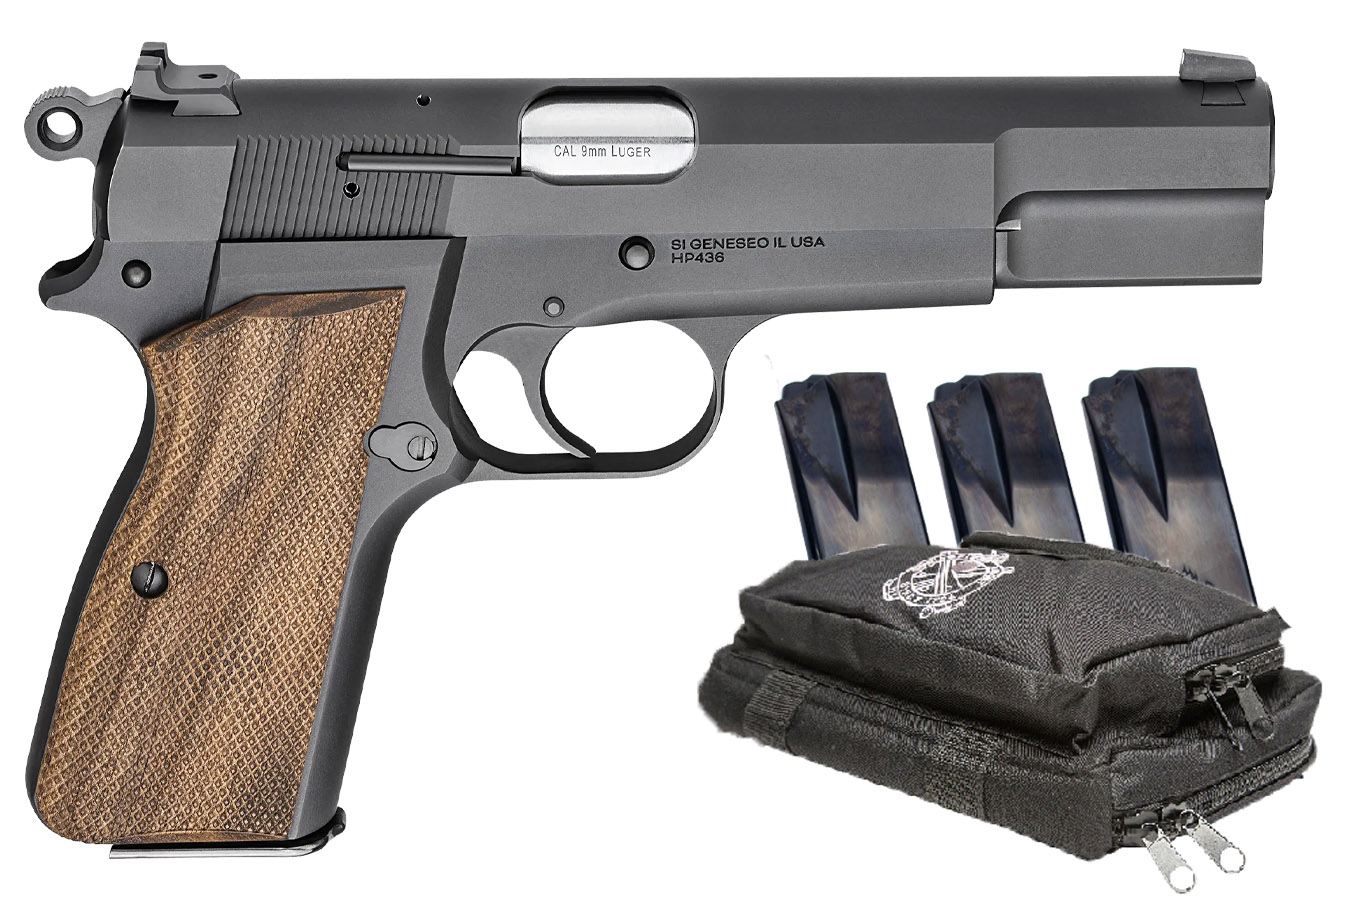 No. 24 Best Selling: SPRINGFIELD SA-35 9MM 4.7 IN BBL 15 RD MAG 4 MAGS / RANGE BAG